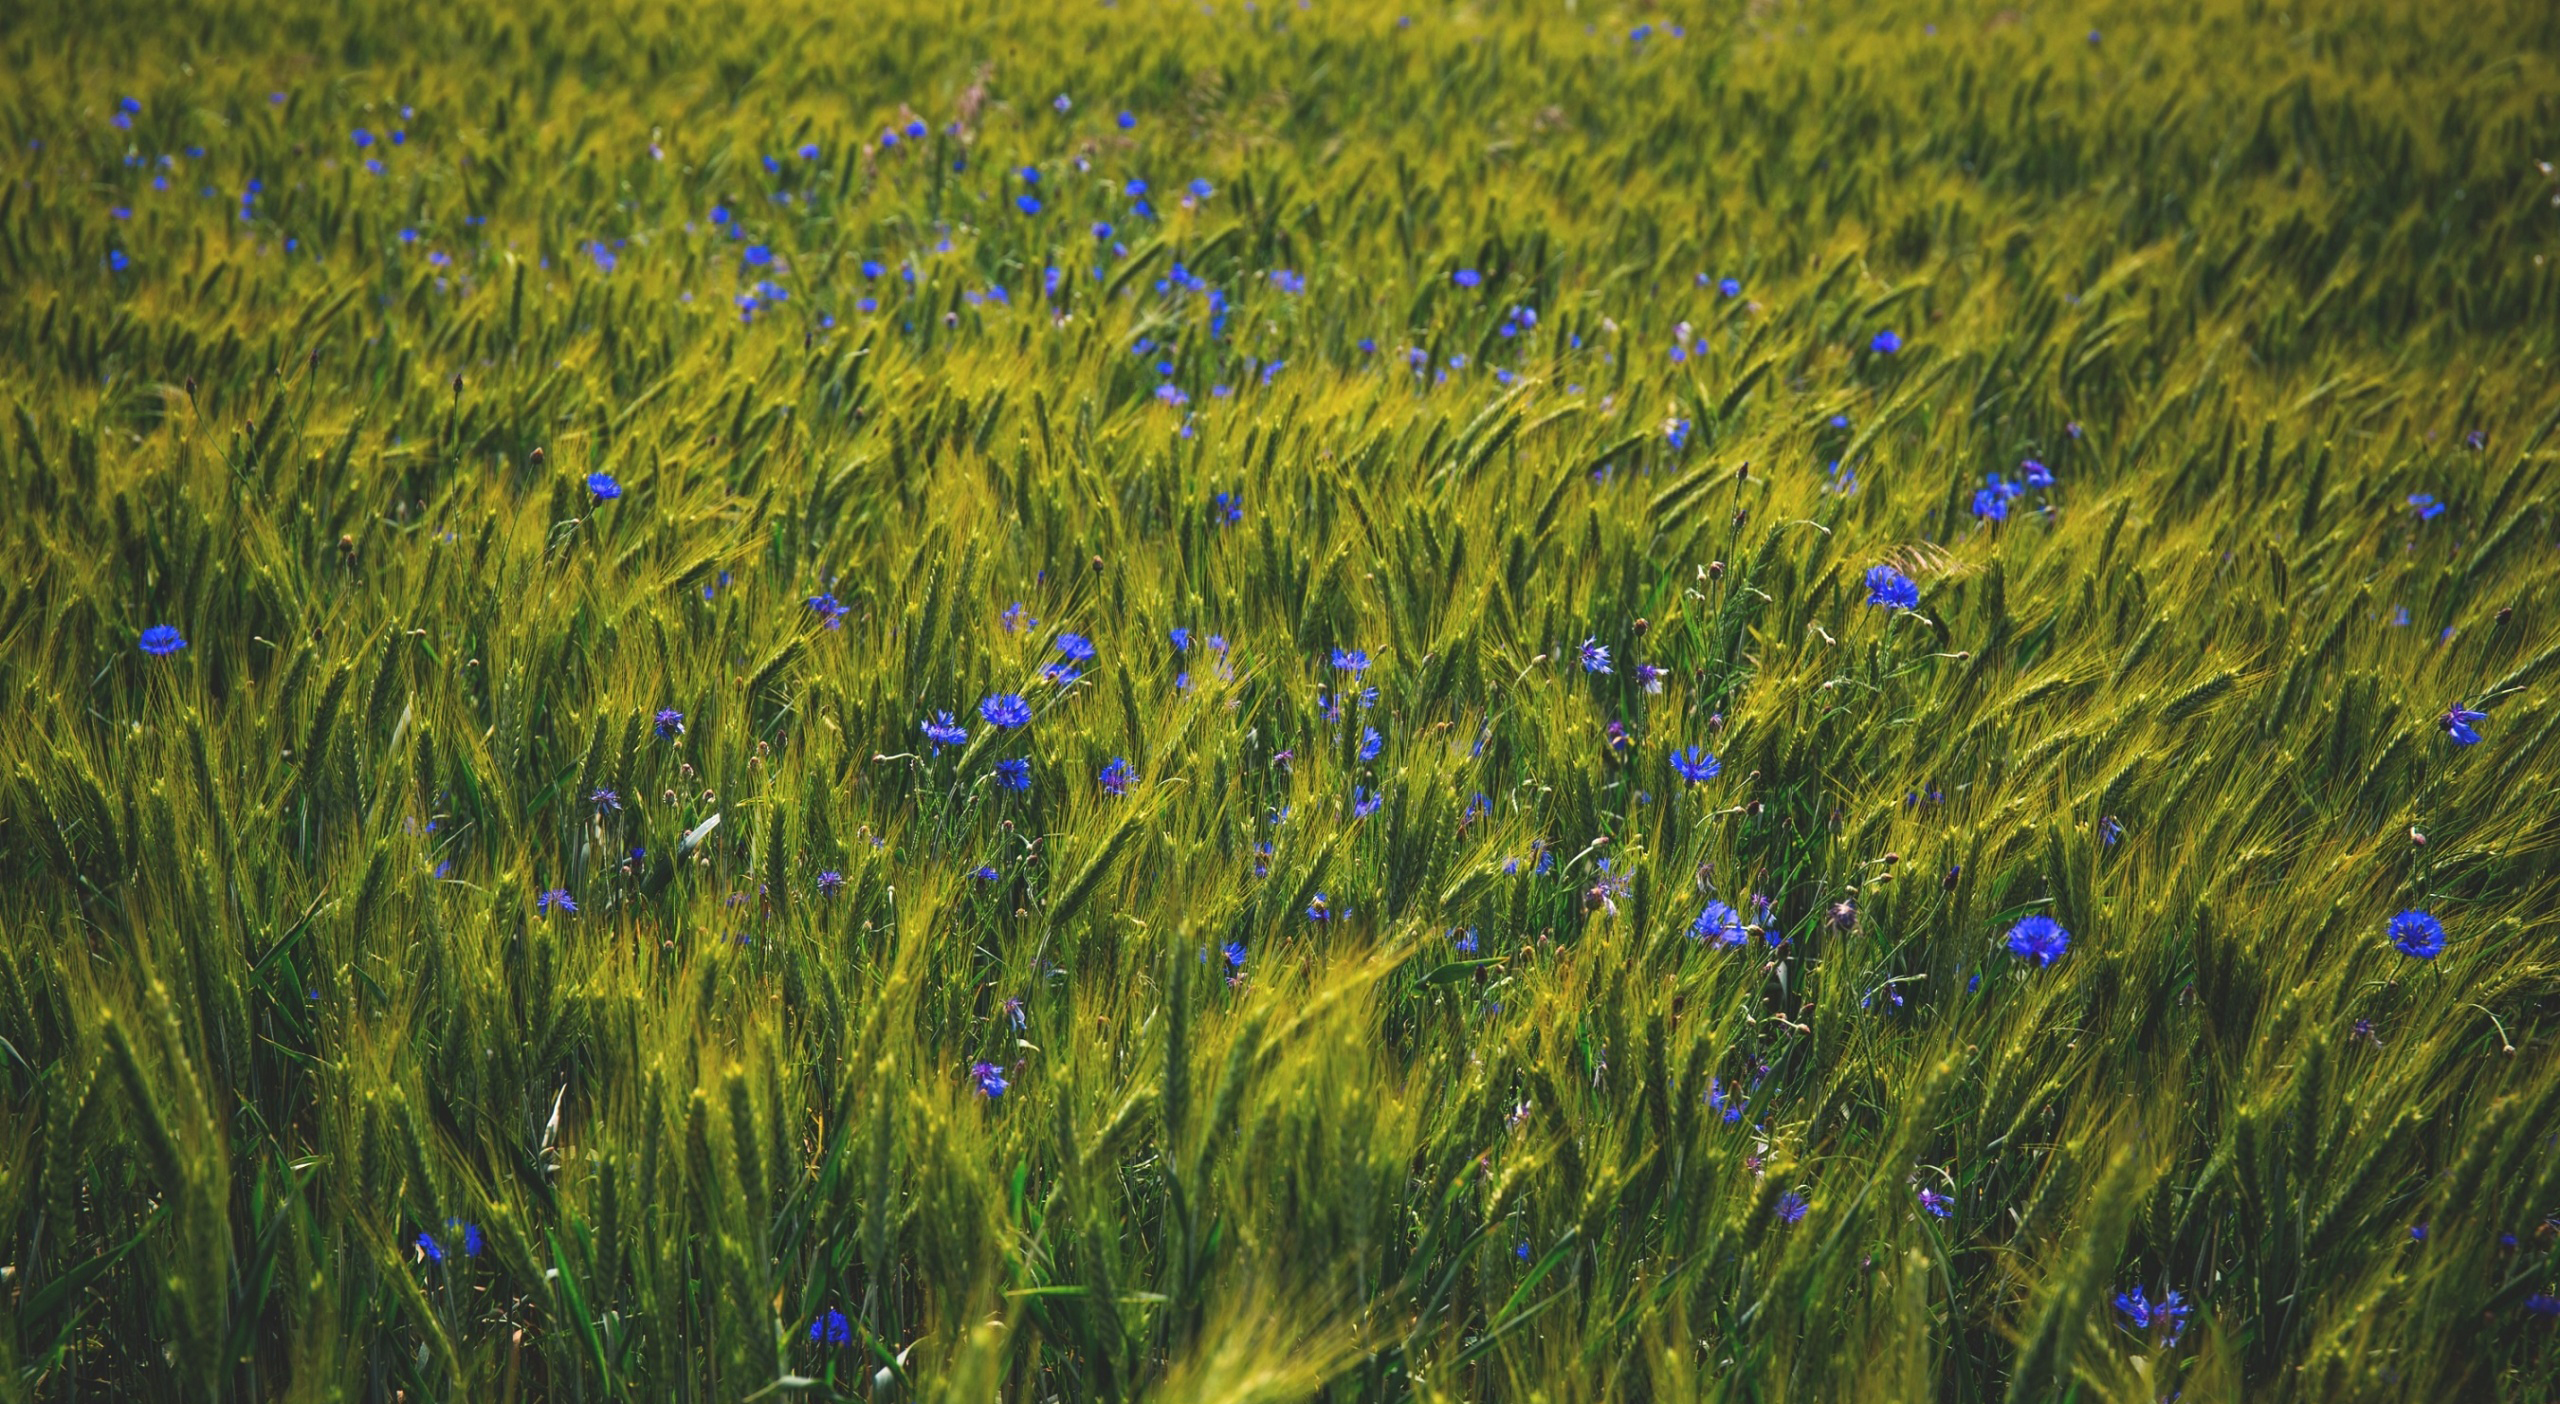 General 2560x1404 field flowers nature